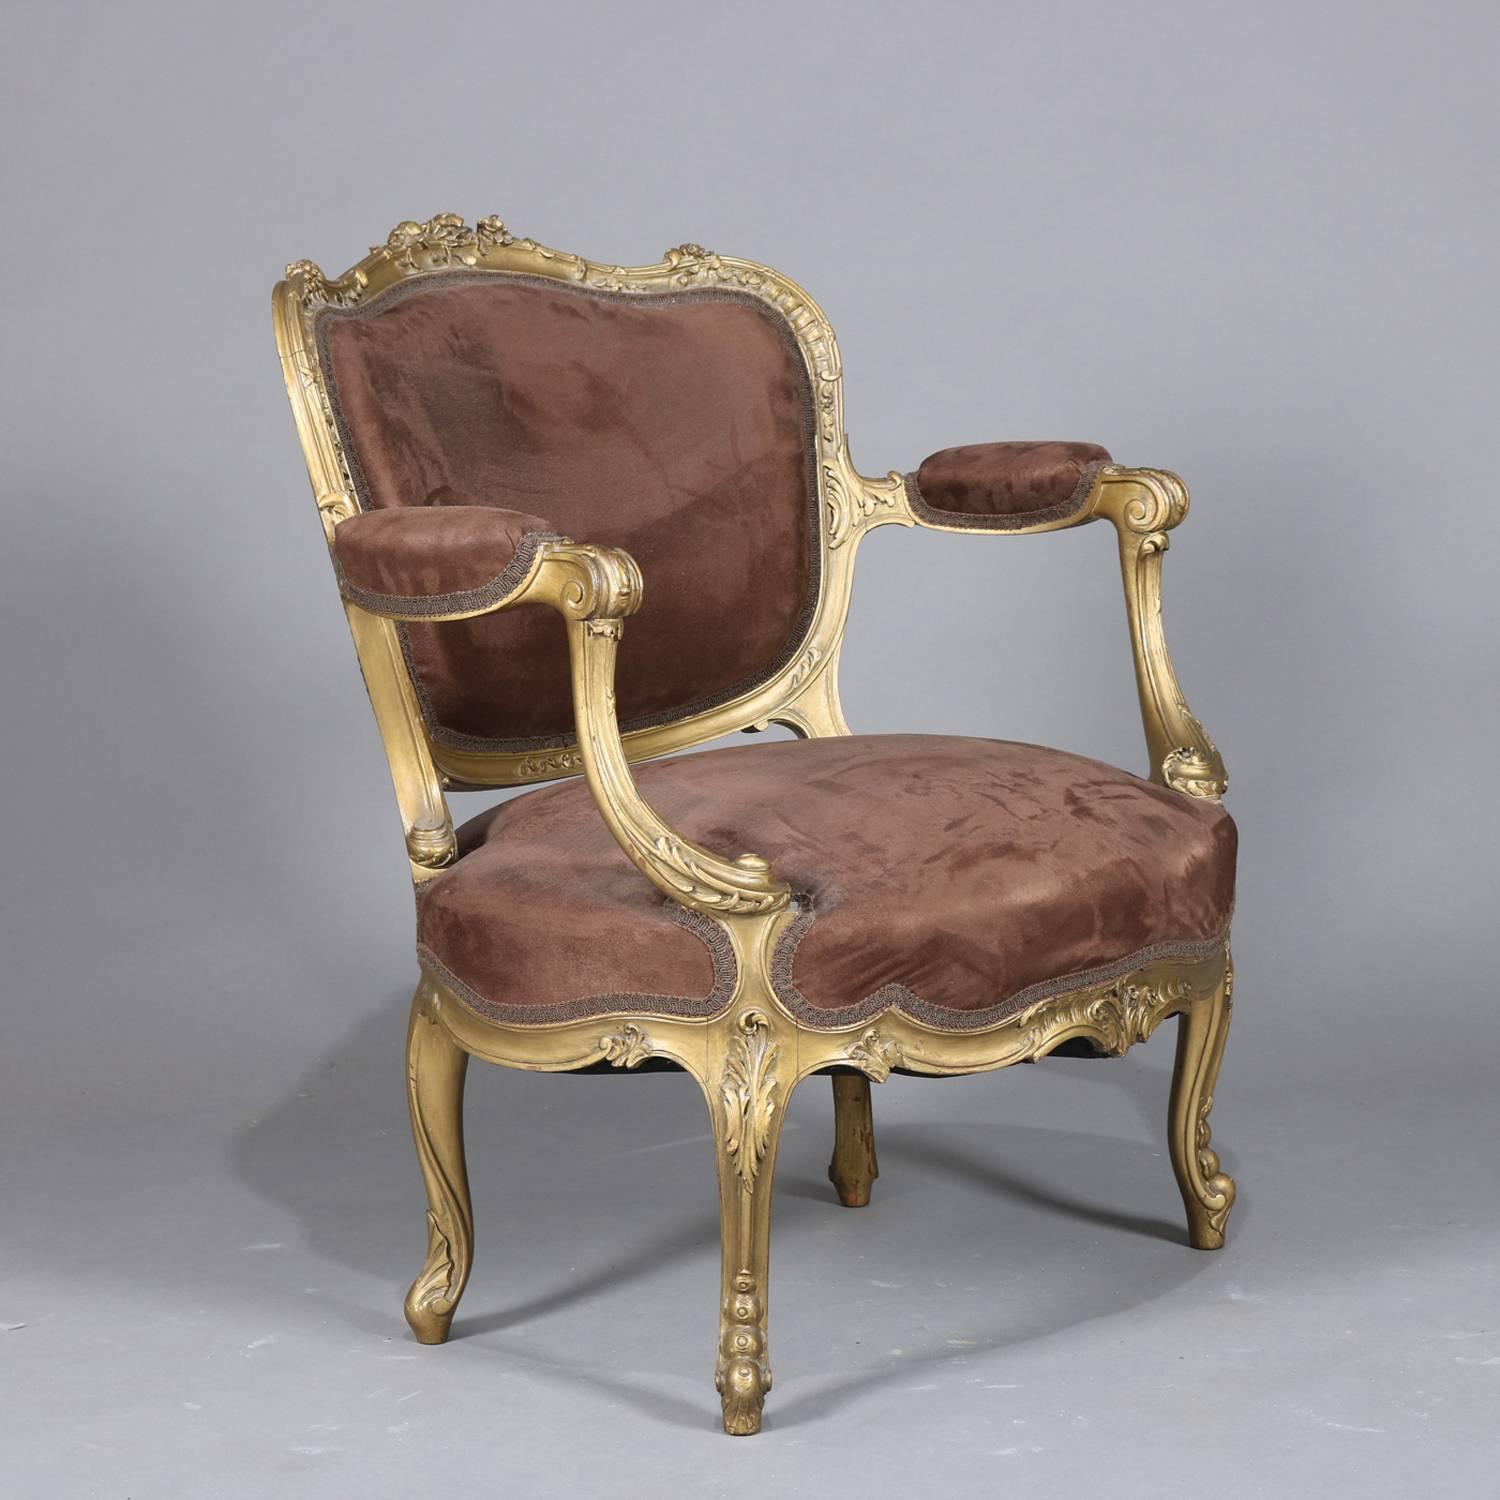 Antique French Louis XV Carved Giltwood Large Fauteuil ‘Chair-and-a-Half’ 1